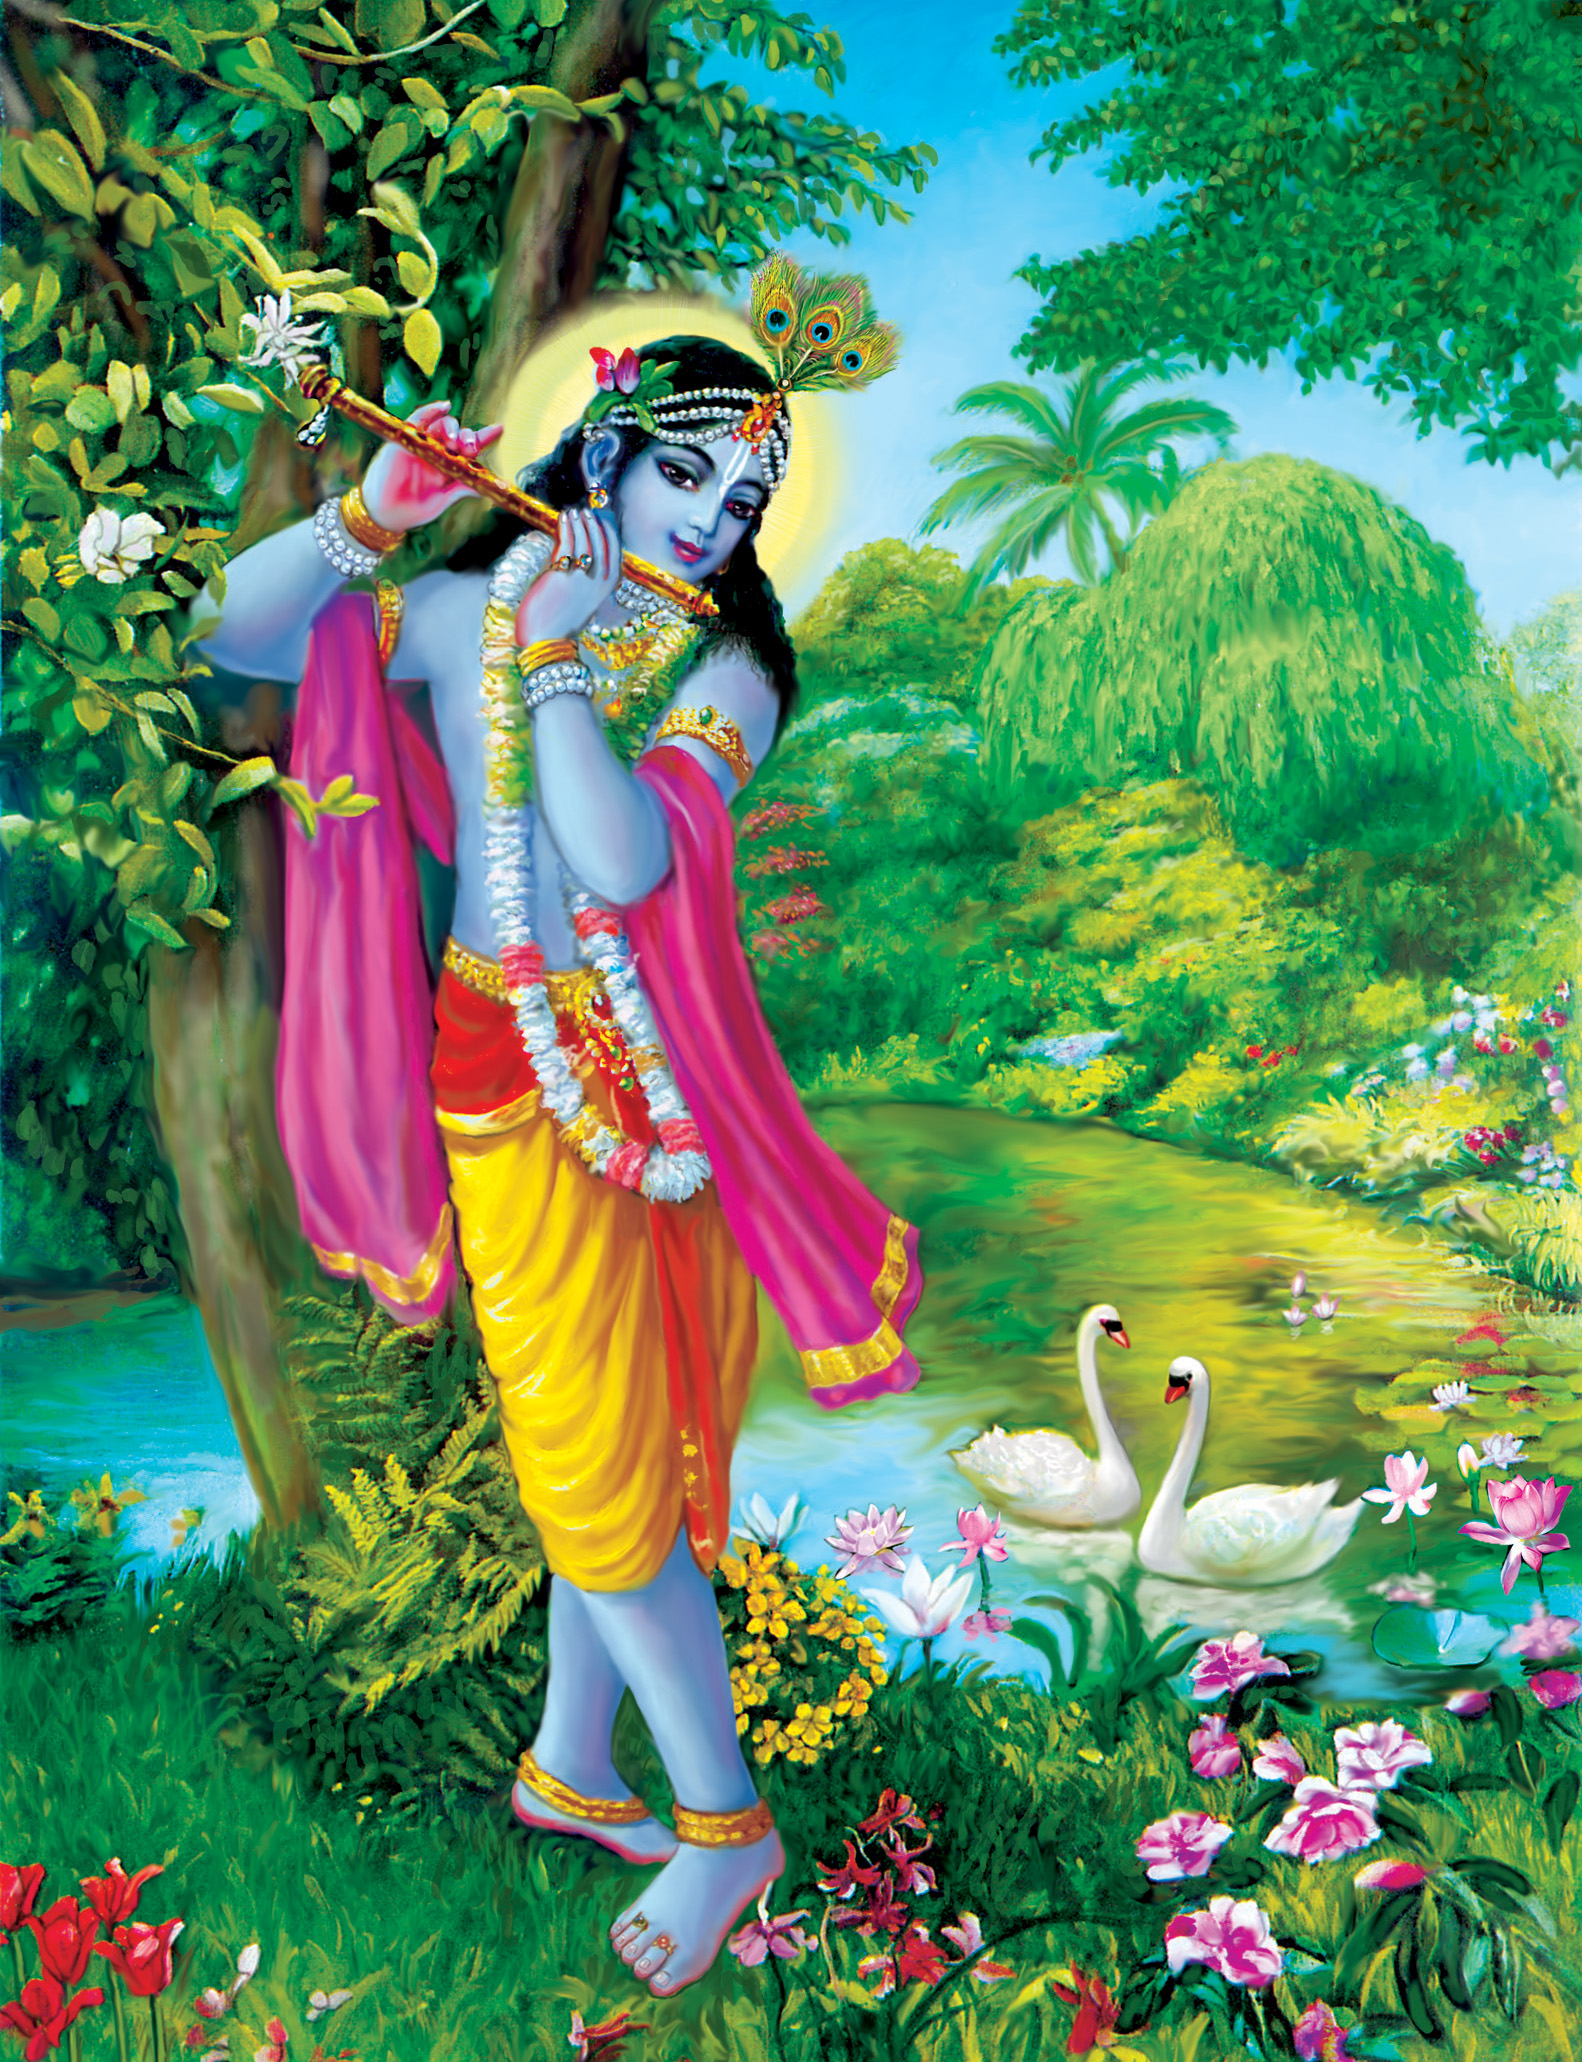 Bhagavad Gita: Of all yogis, he who abides in Me with great faith is the highest of all